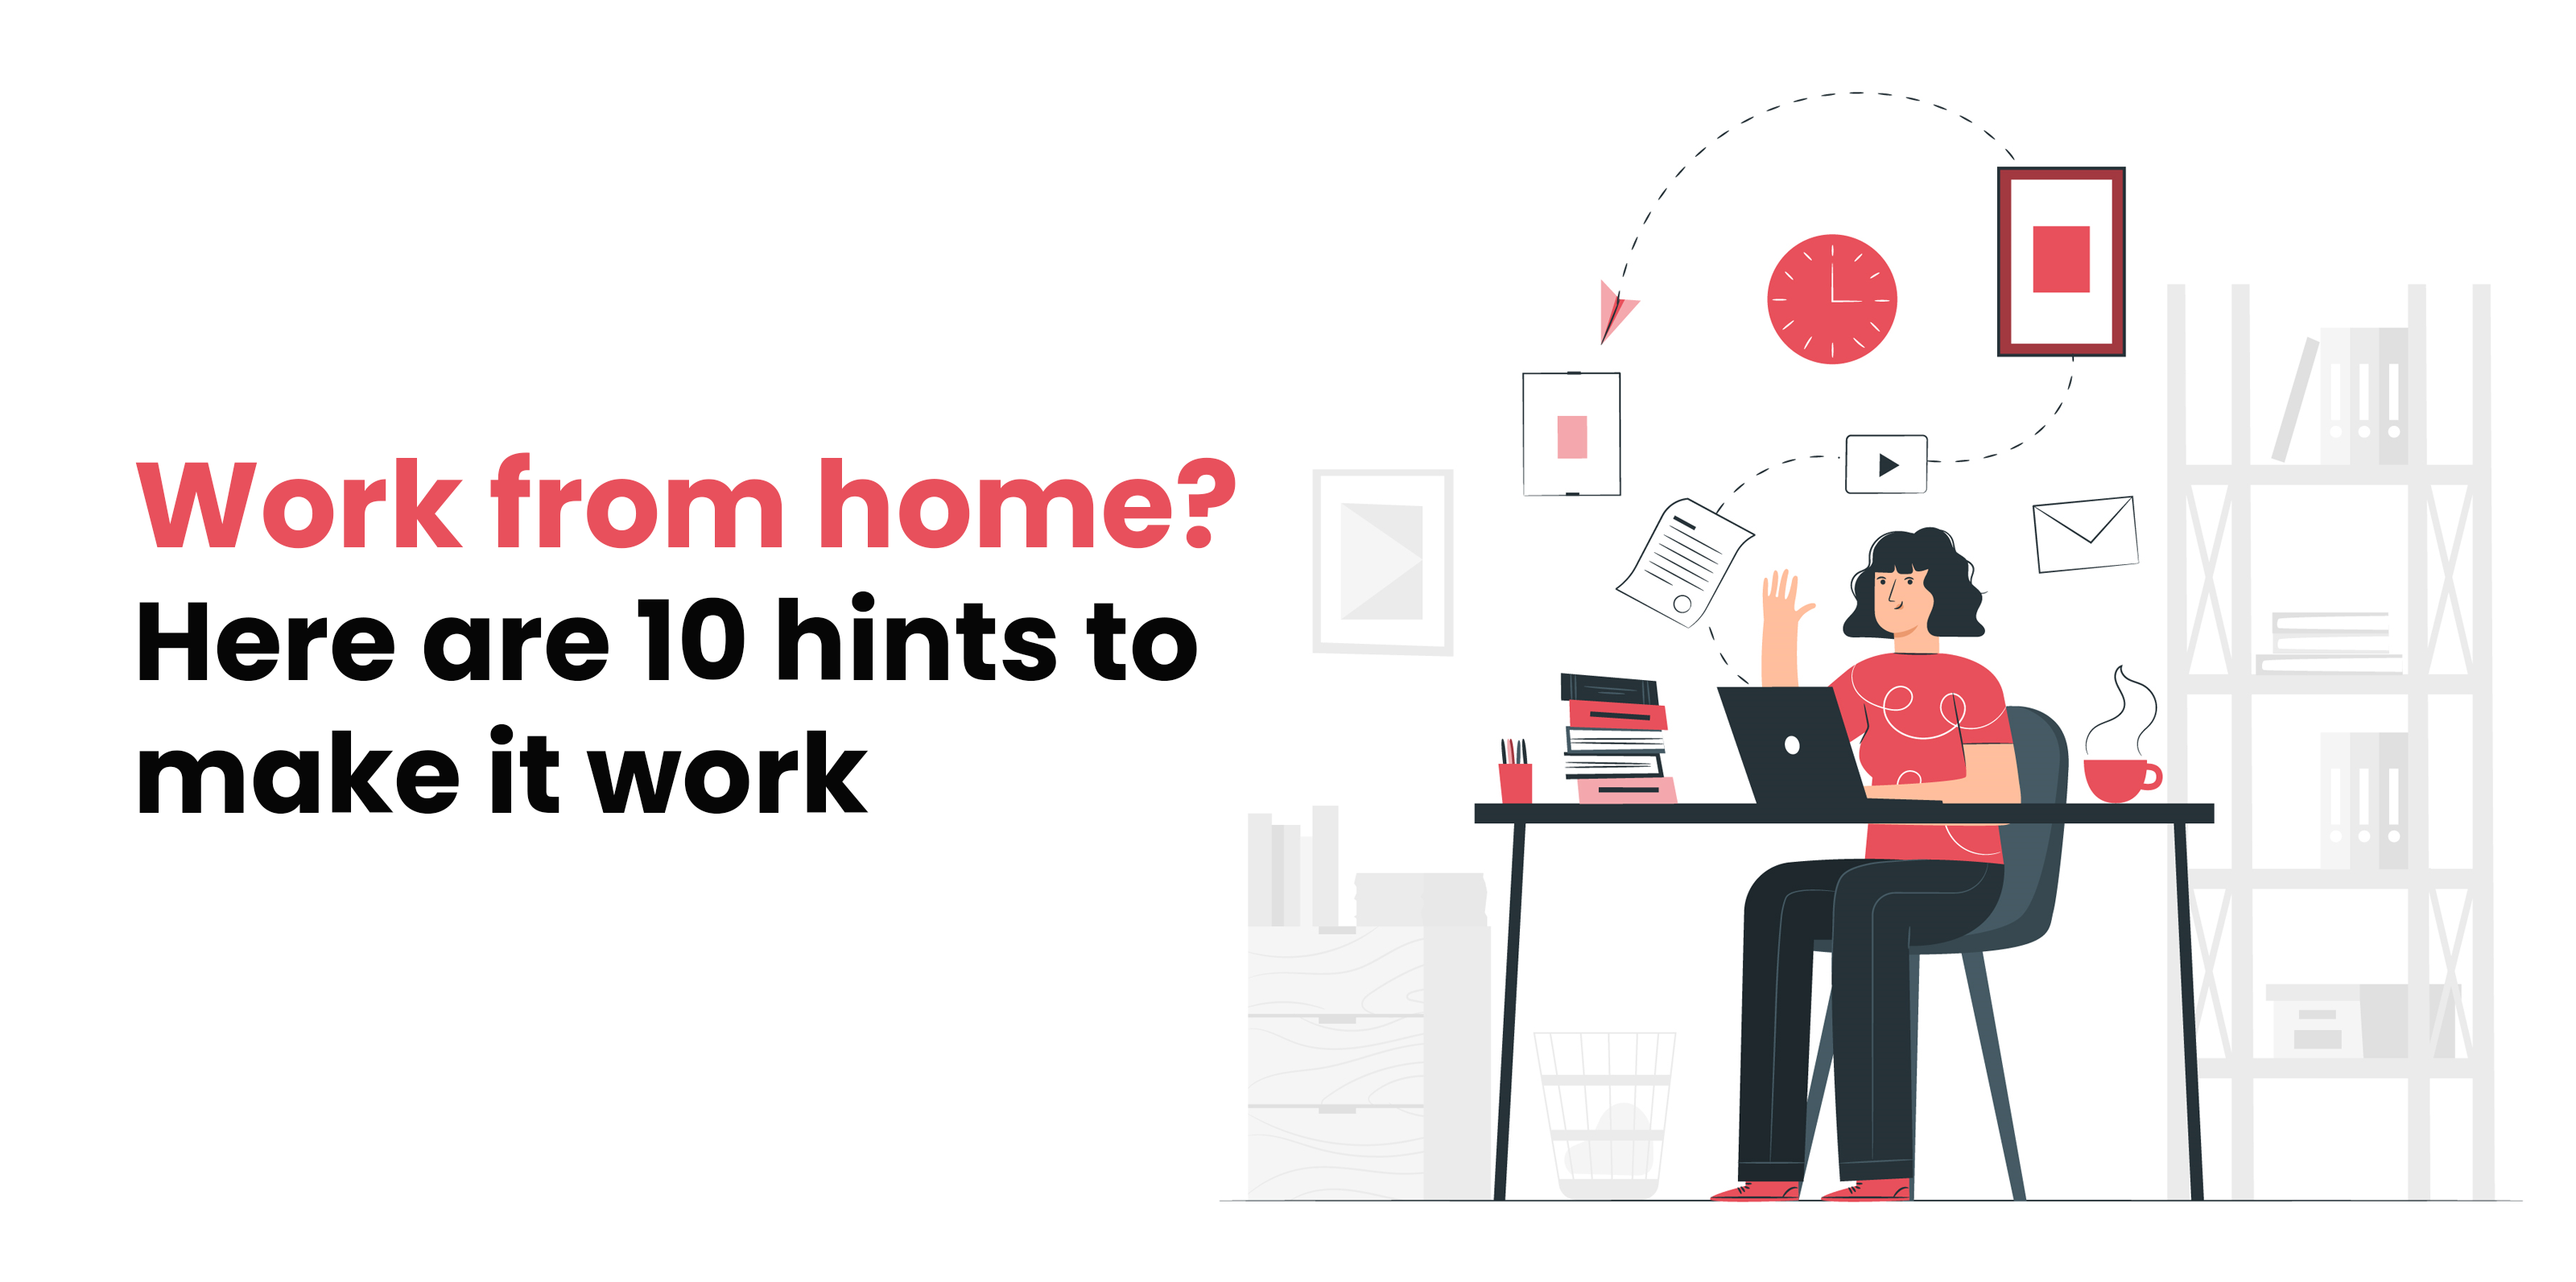 Tips to make work from home productive